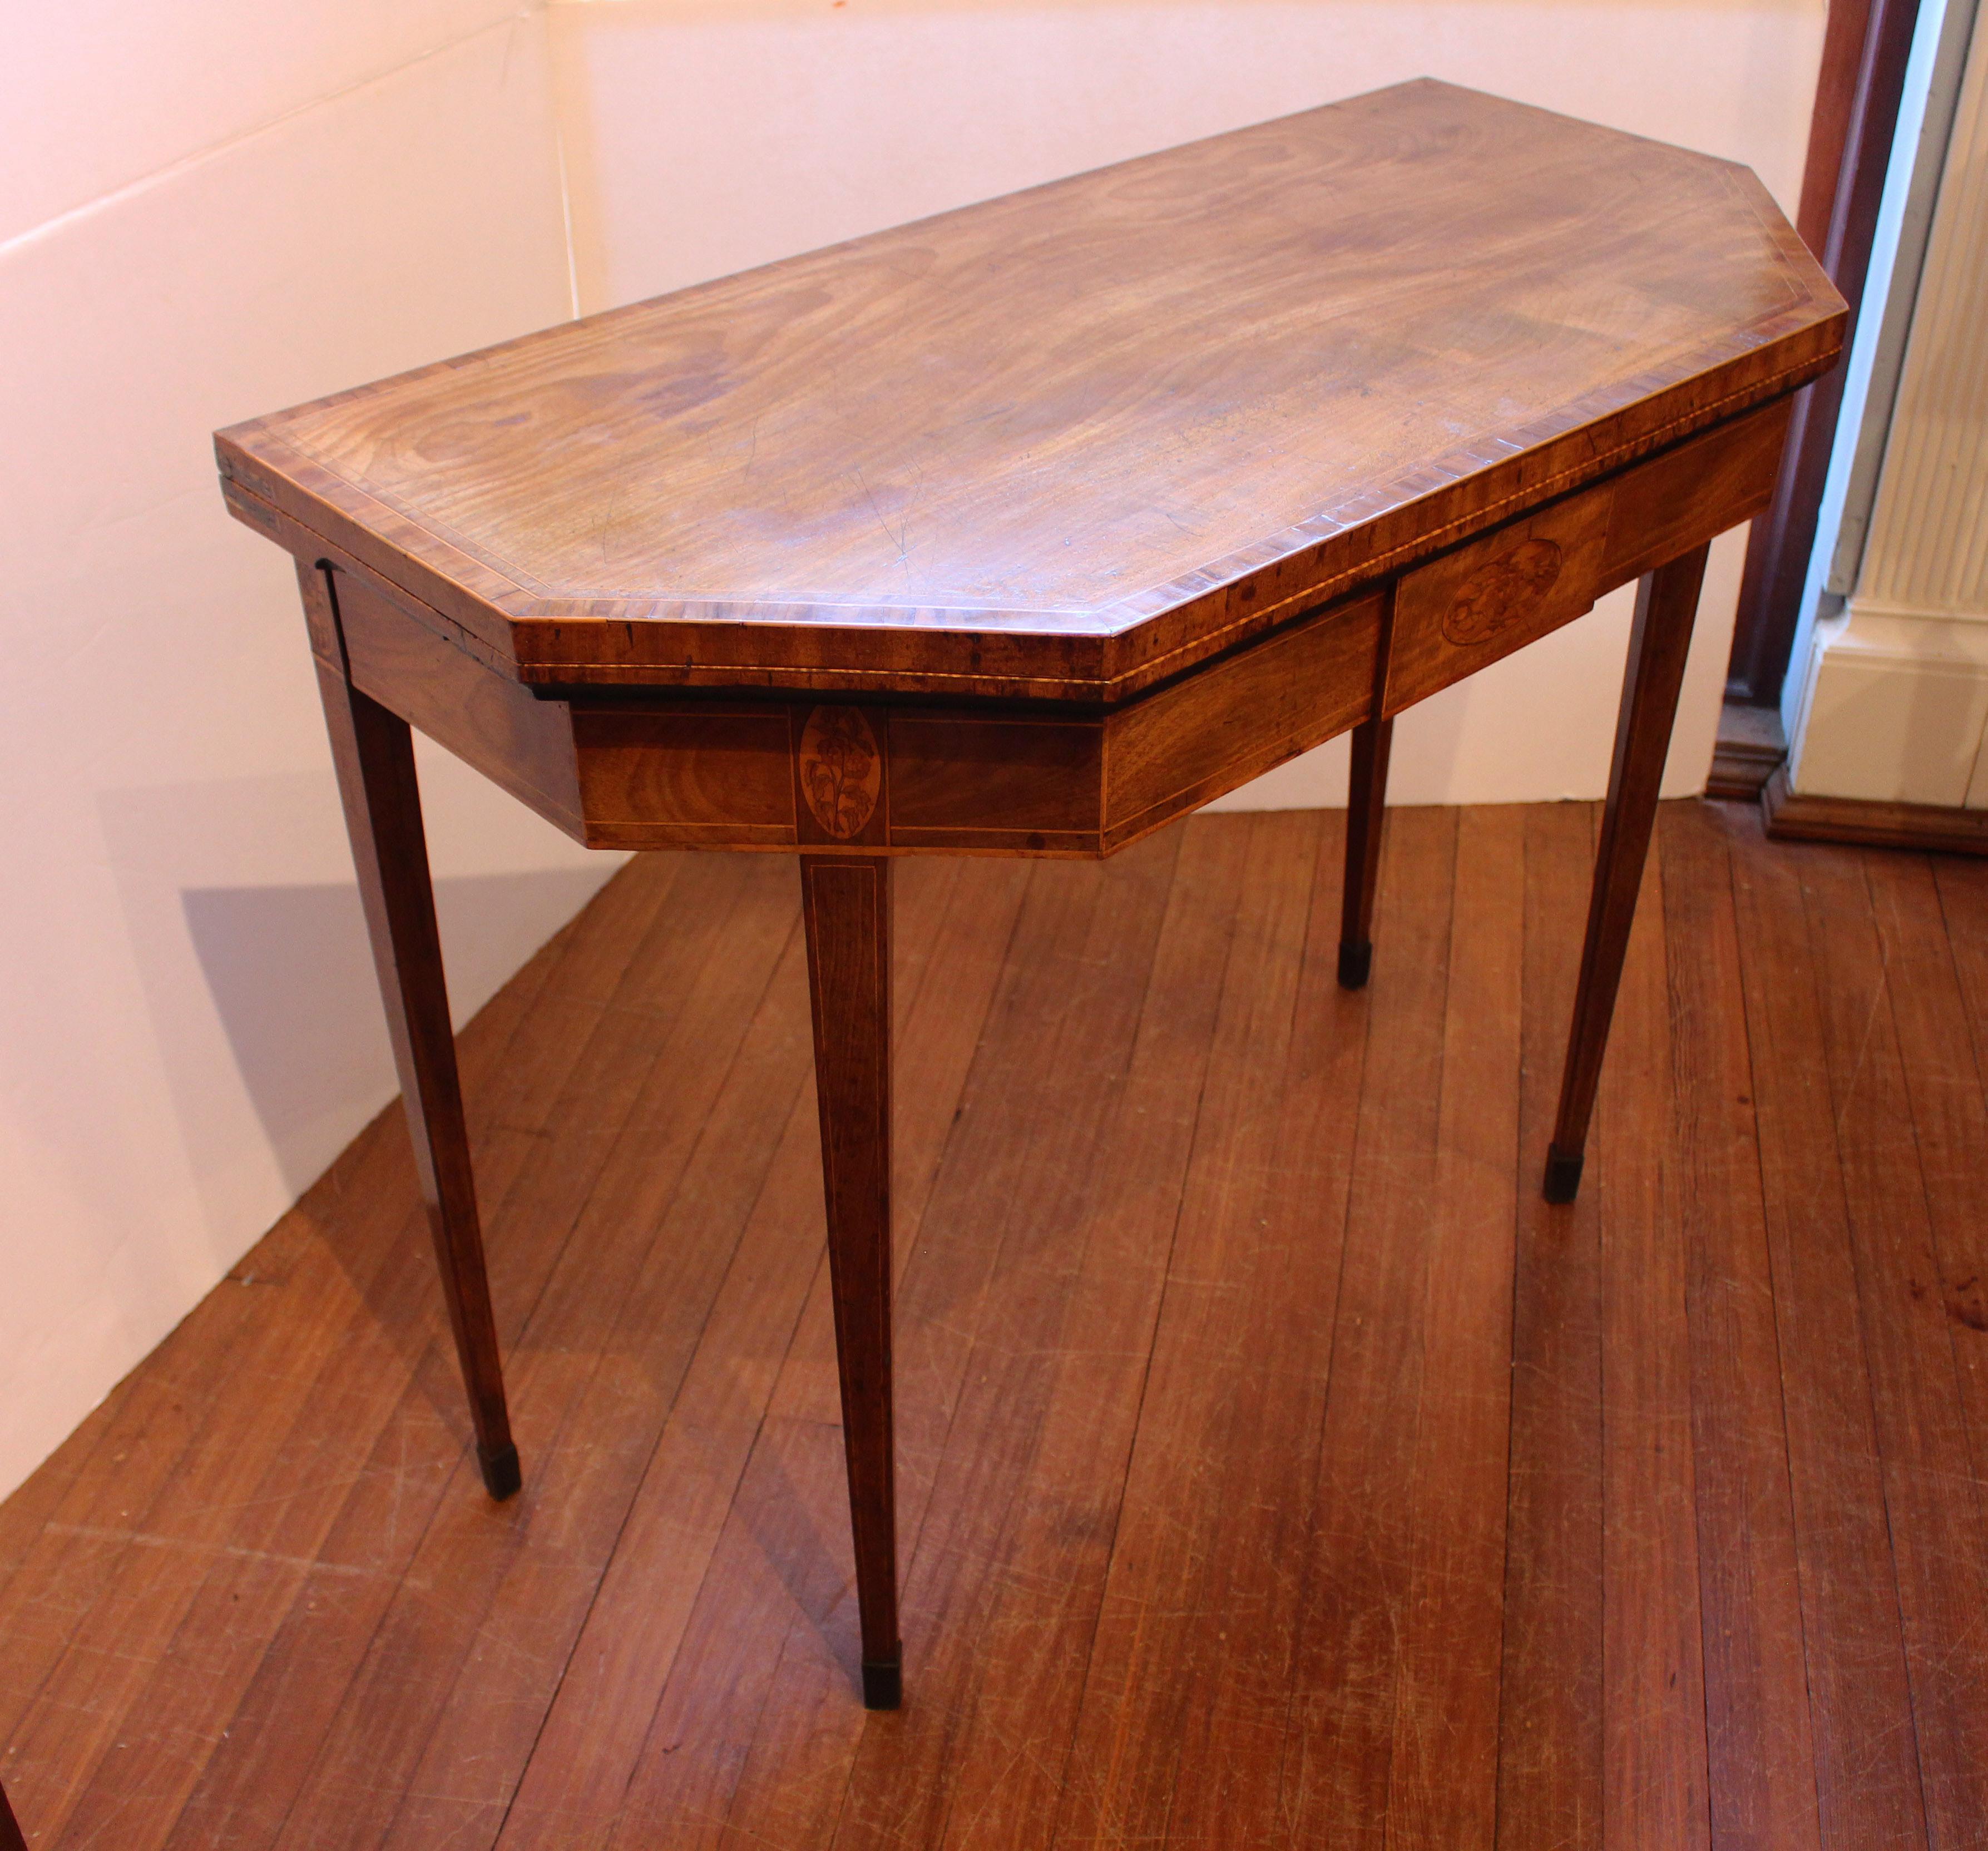 Late 18th century Georgian inlaid fold-top card table, English. Interesting canted corner form opens to a hexagonal shape. The leg placement at the mid-point of the canted sides allows for greater seating space, as does the double-gate leg